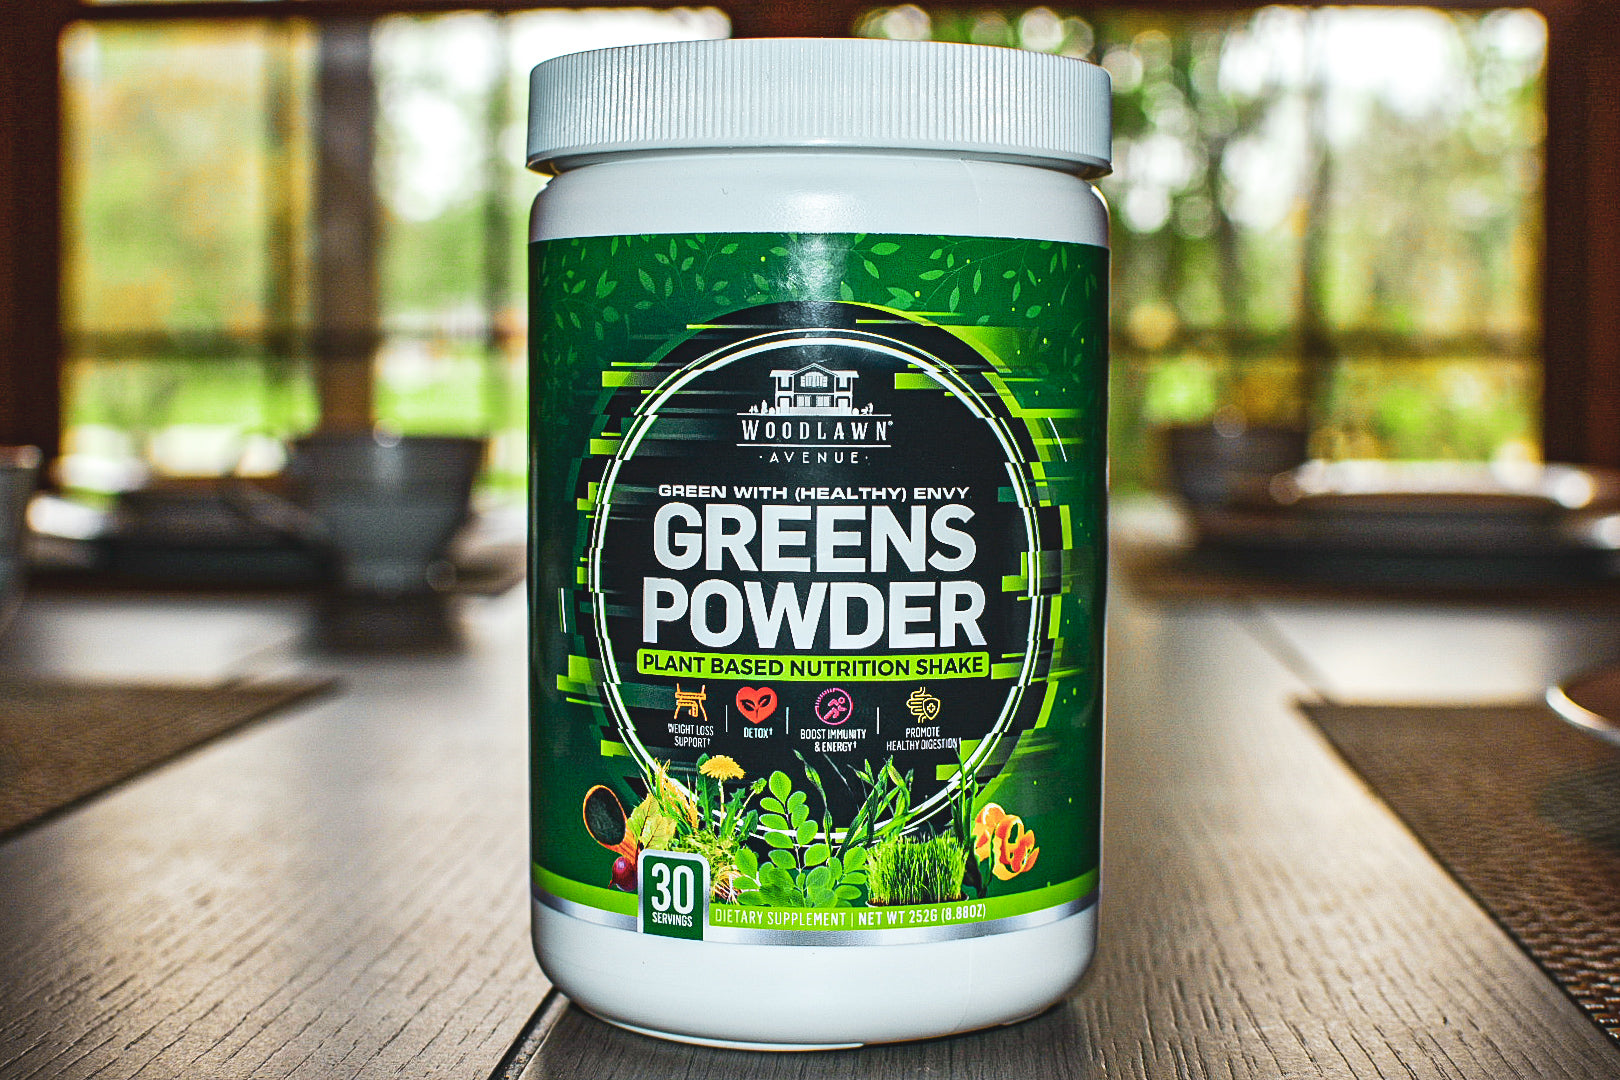 Green With (Healthy) Envy - Greens Powder Supplement Mix (Fruit Punch Flavored with Super Foods)